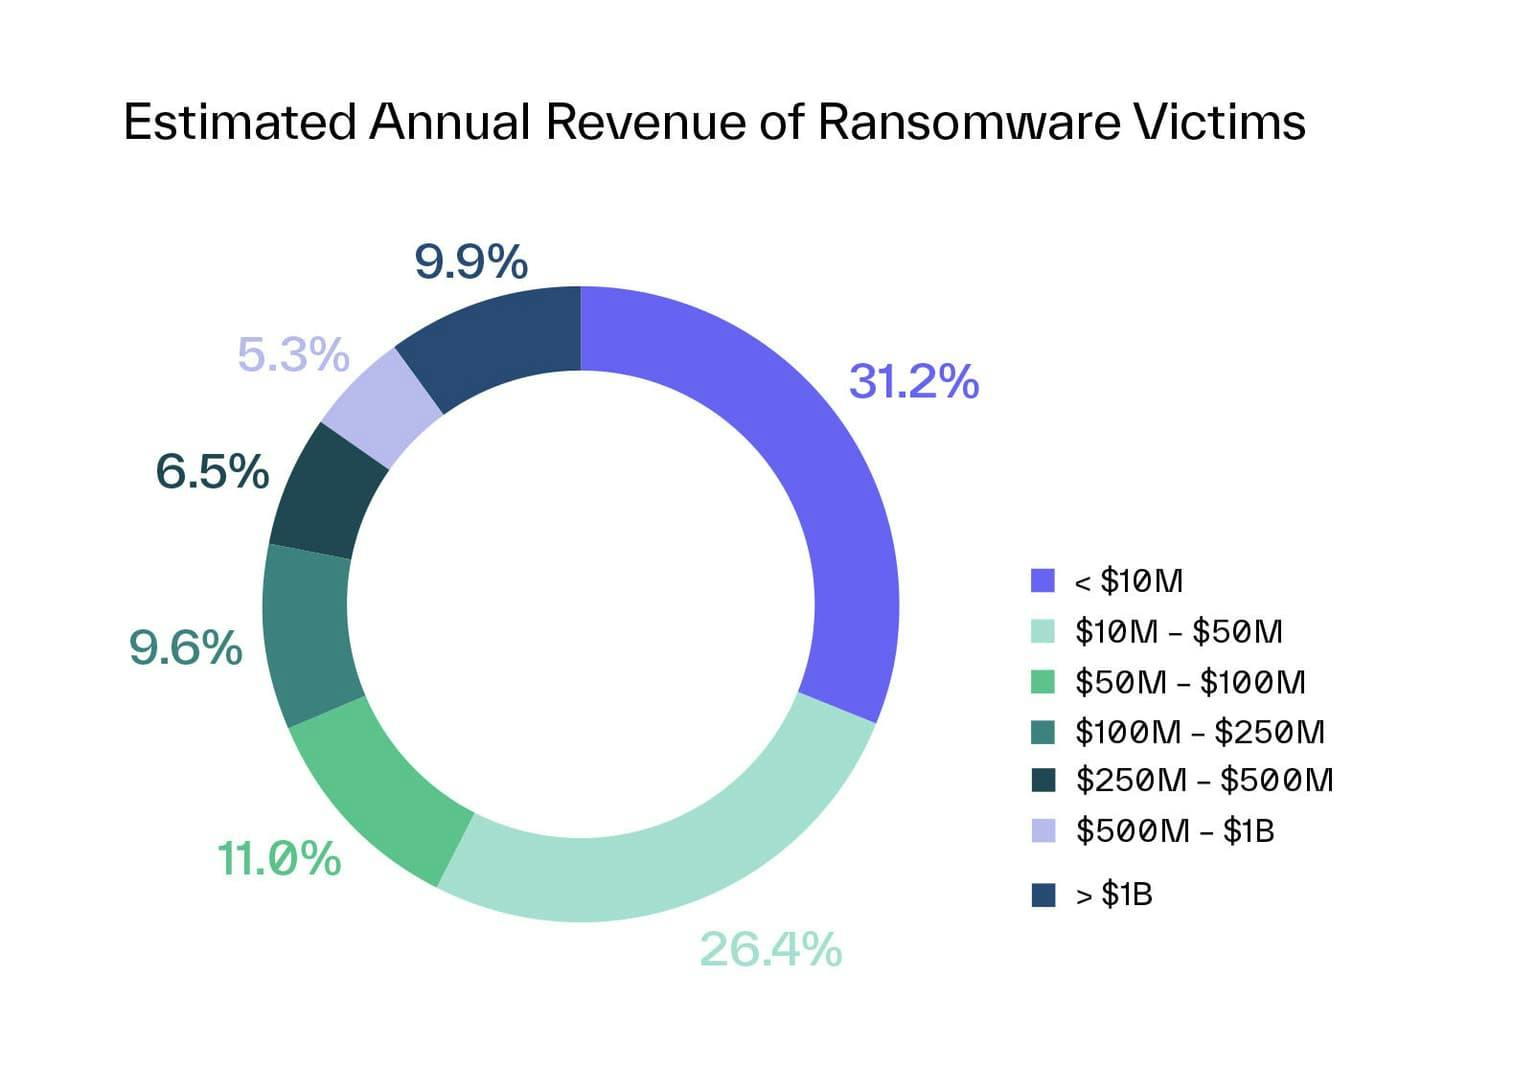 Ransomware victims by annual revenue